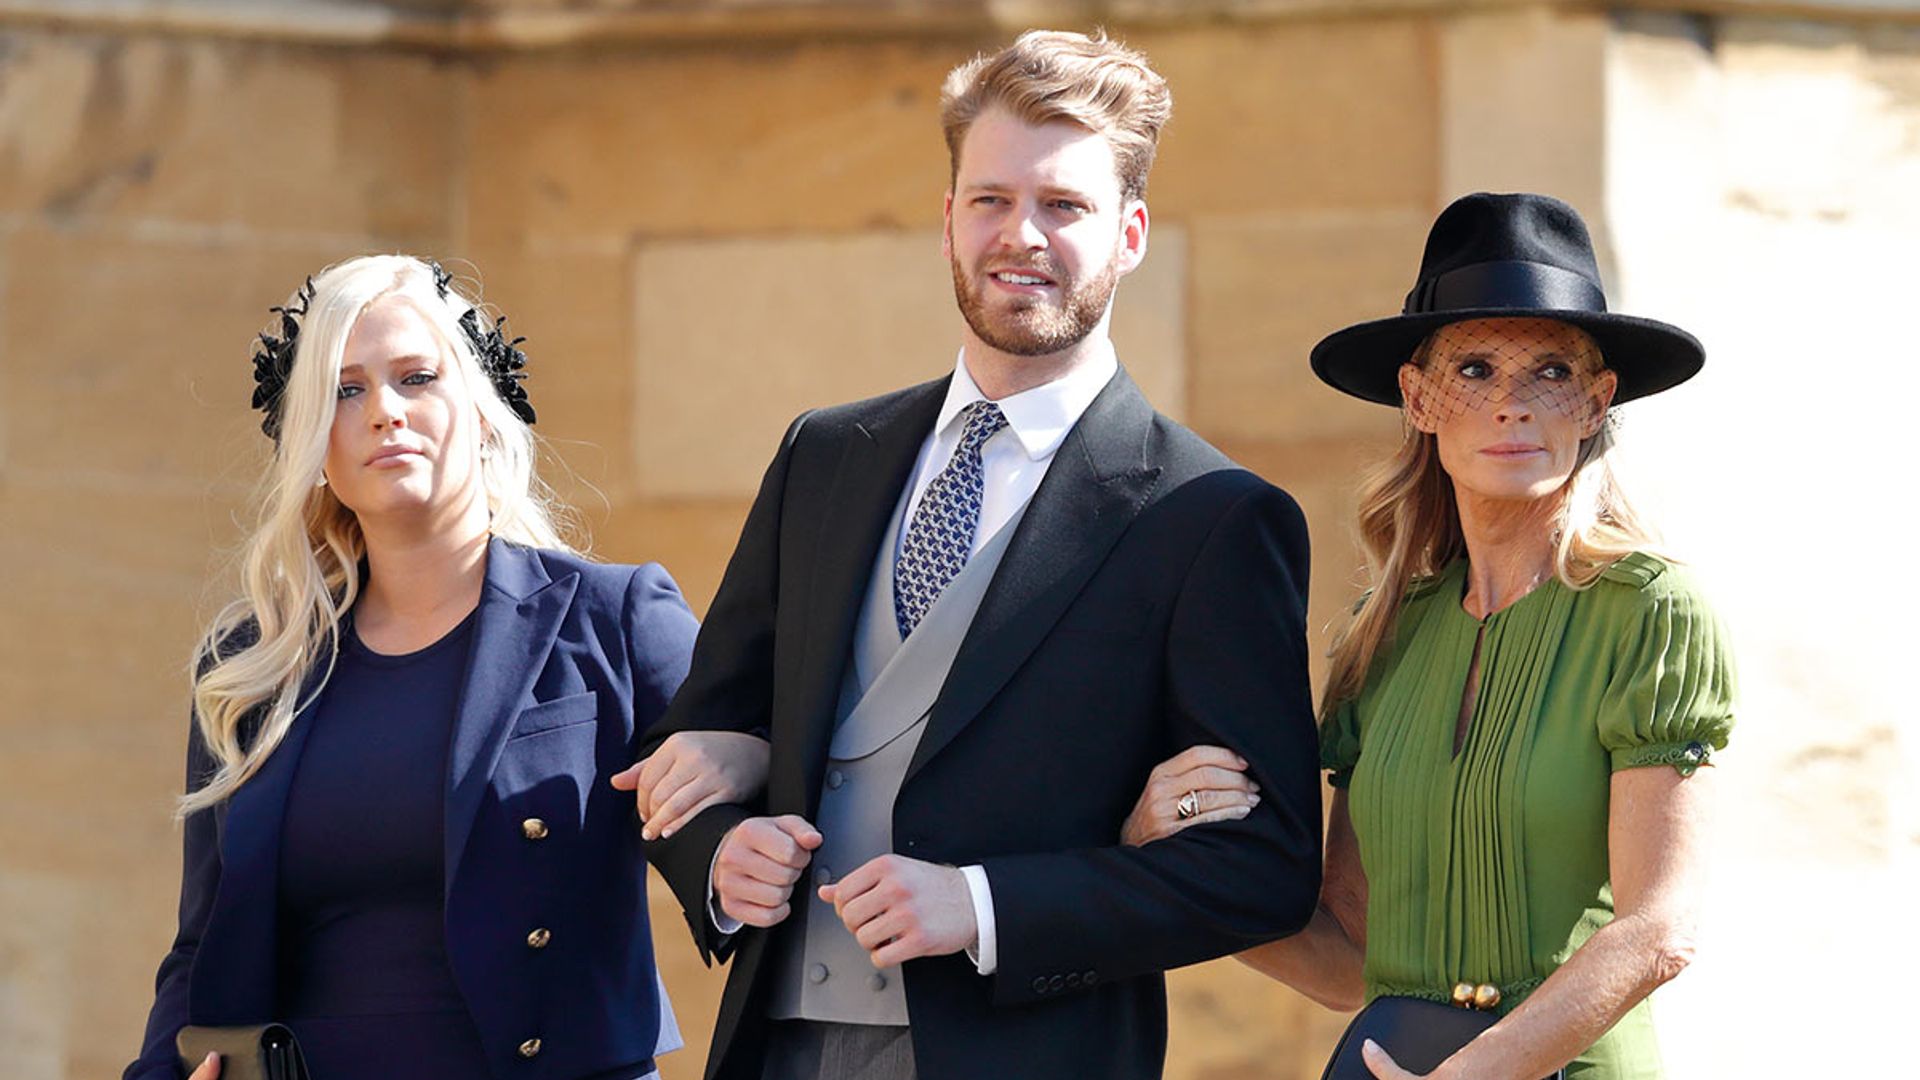 Kitty Spencer's sister confirms mum Victoria's attendance at wedding with stunning pictures